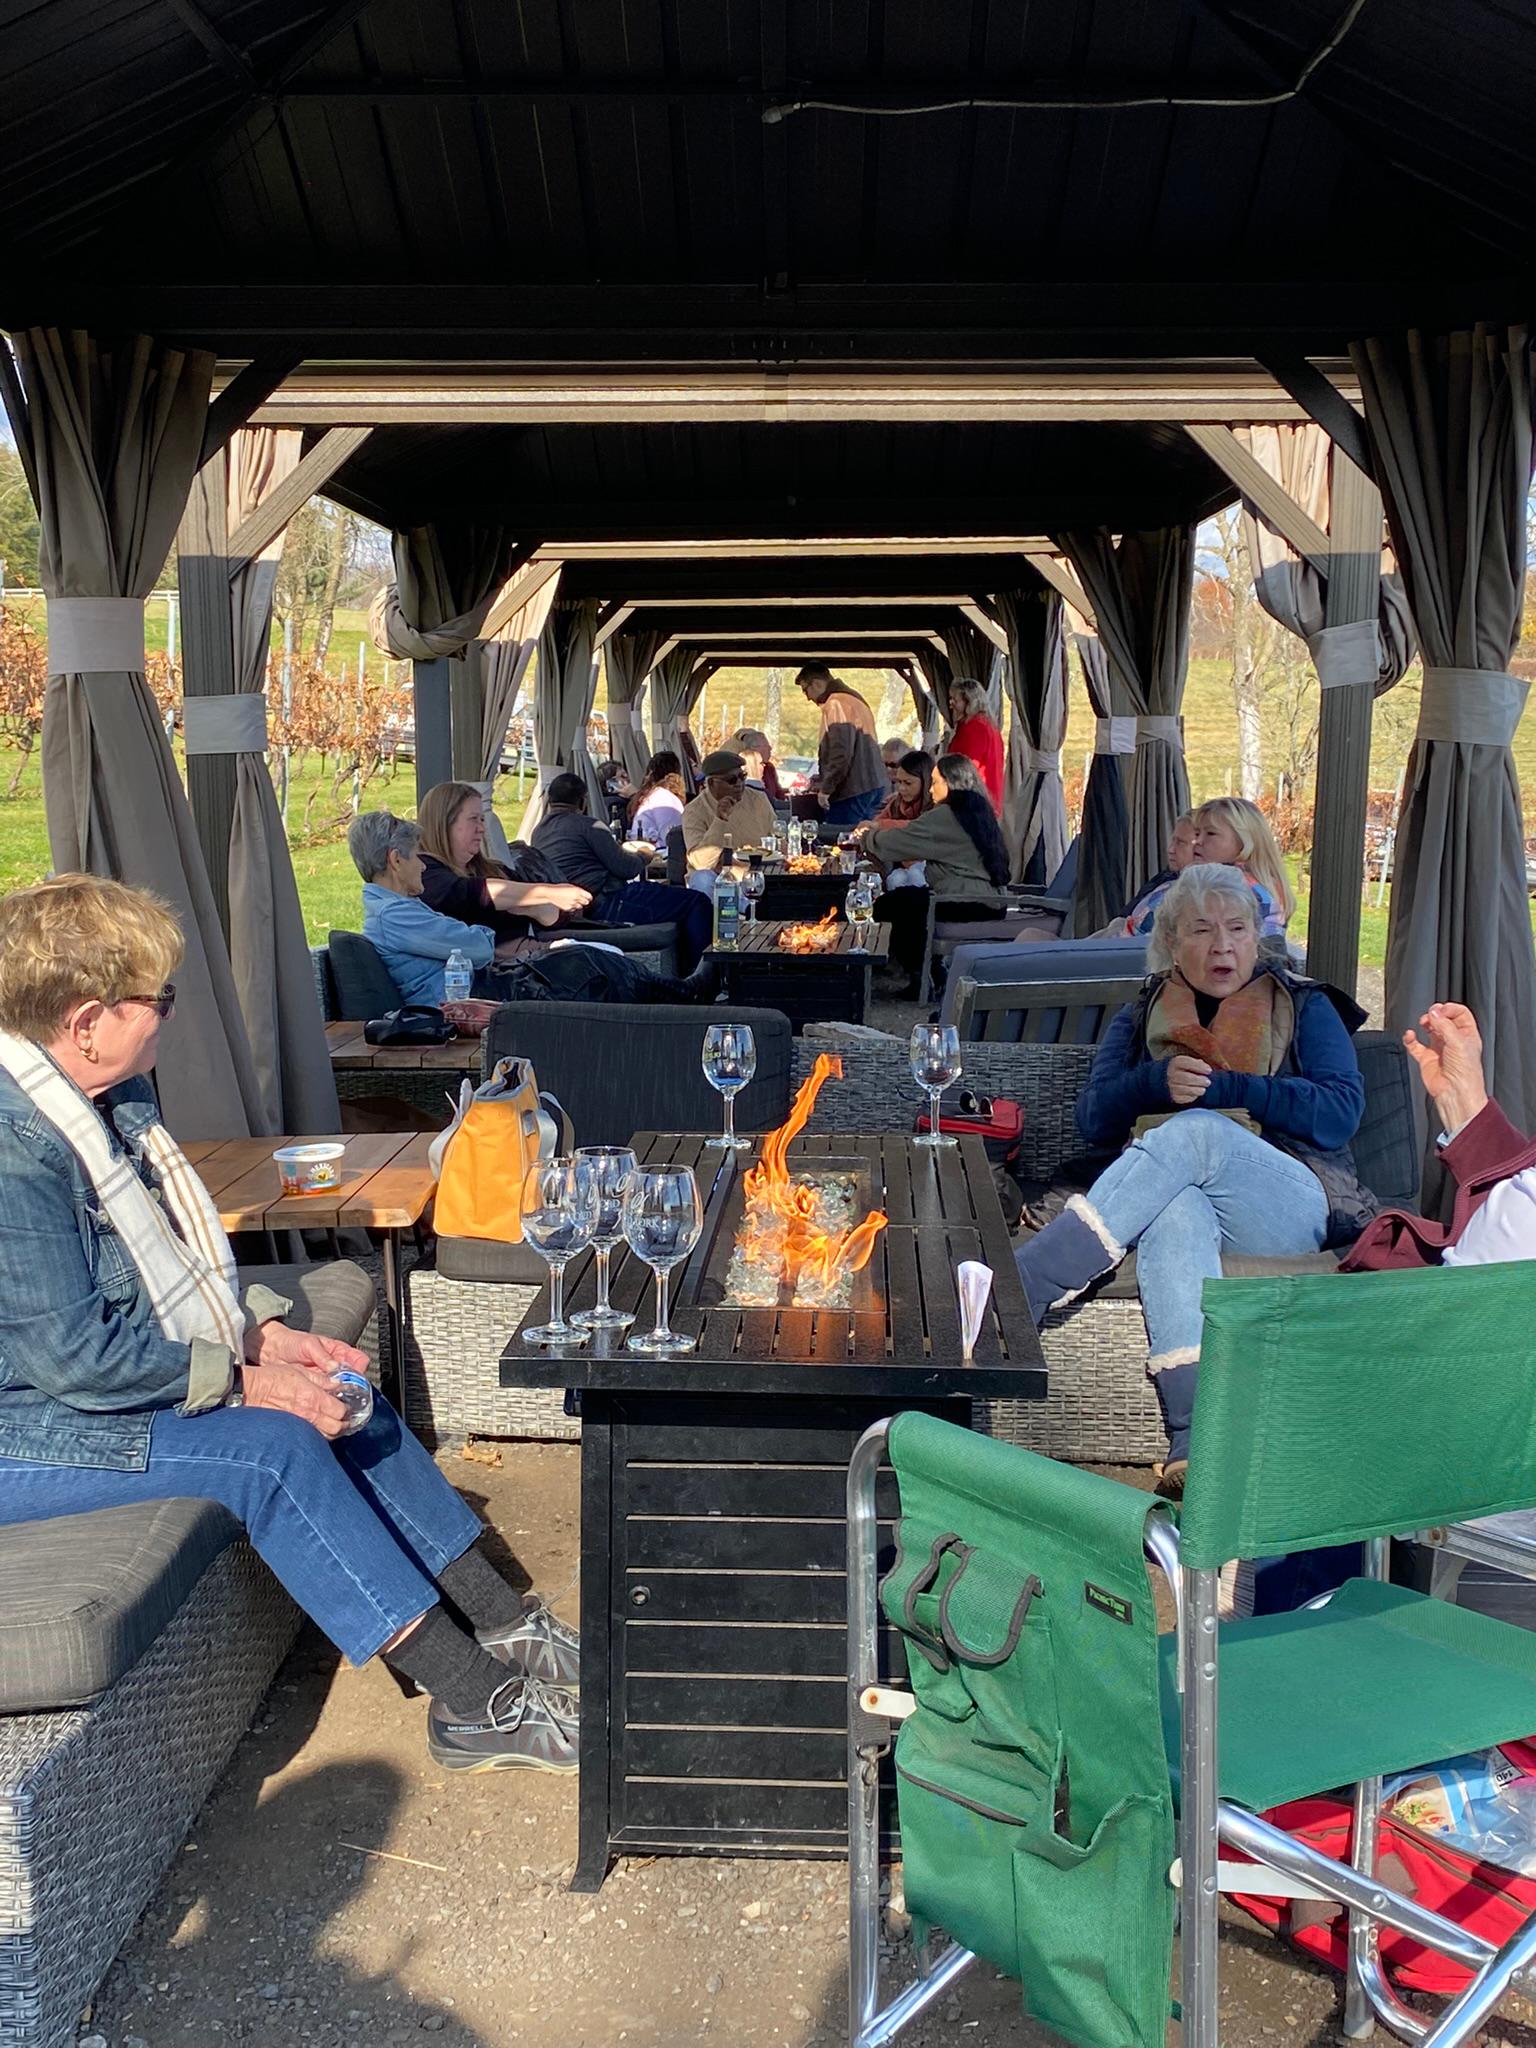 We'll keep you warm and your wine chilled with our Private Wine Cabana's firepits.  Reserve yours today for an extra special day at the winery.